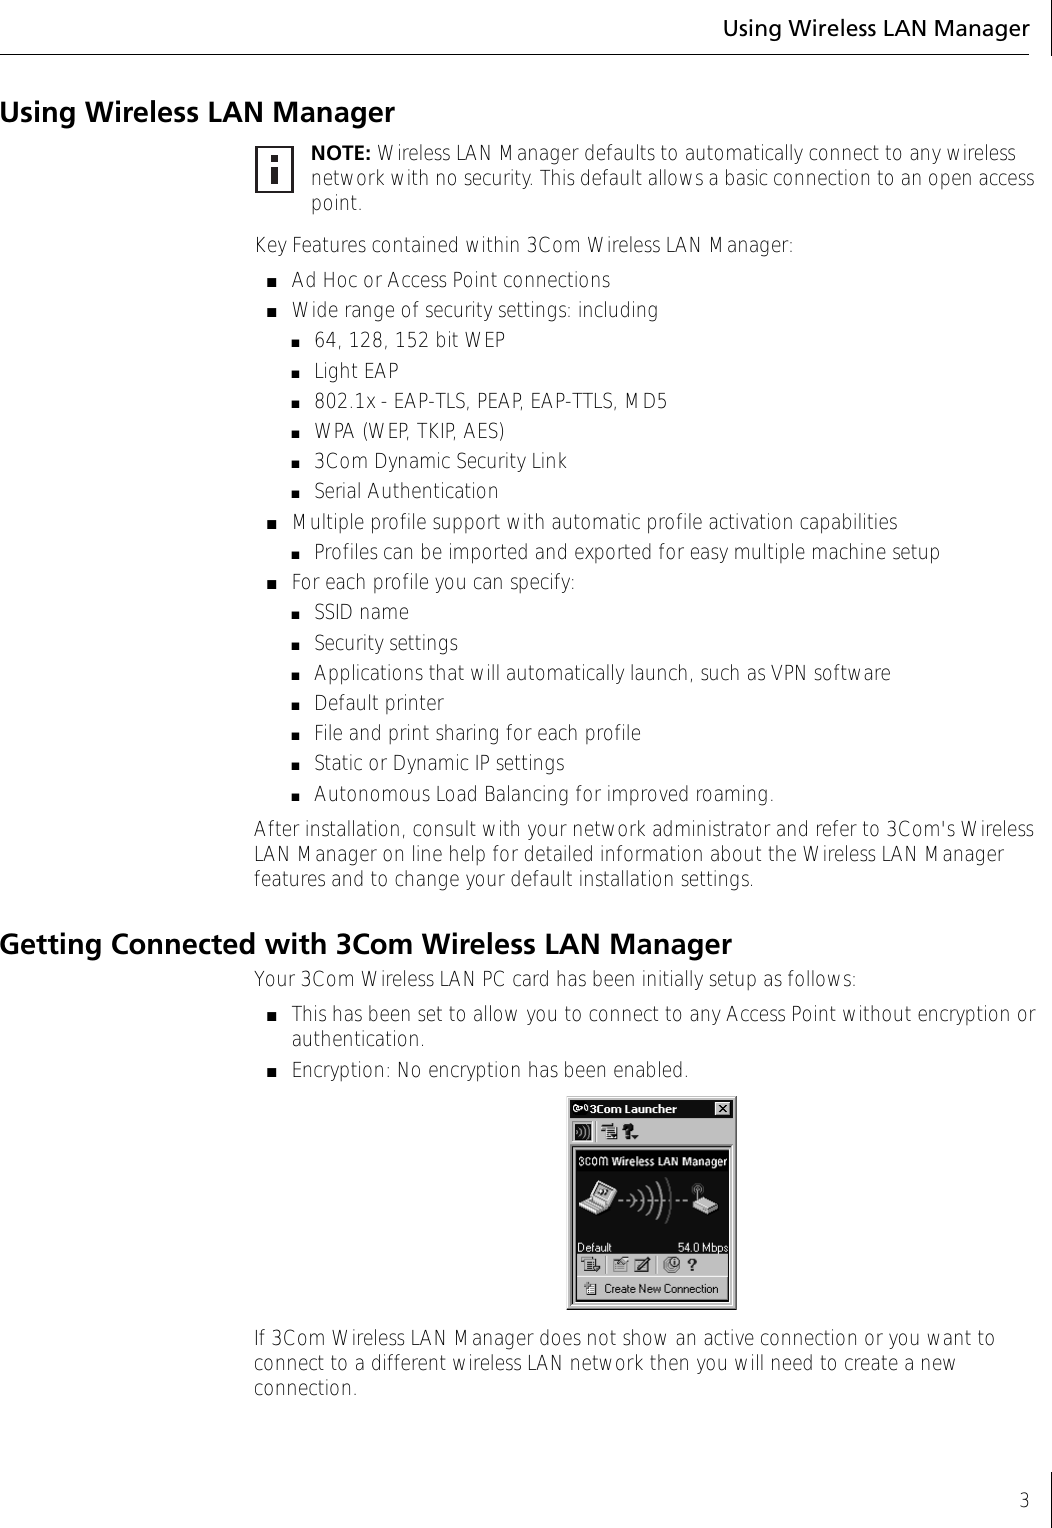 Using Wireless LAN Manager3Using Wireless LAN ManagerKey Features contained within 3Com Wireless LAN Manager:■Ad Hoc or Access Point connections■Wide range of security settings: including ■64, 128, 152 bit WEP■Light EAP■802.1x - EAP-TLS, PEAP, EAP-TTLS, MD5■WPA (WEP, TKIP, AES)■3Com Dynamic Security Link■Serial Authentication■Multiple profile support with automatic profile activation capabilities■Profiles can be imported and exported for easy multiple machine setup■For each profile you can specify:■SSID name■Security settings■Applications that will automatically launch, such as VPN software■Default printer ■File and print sharing for each profile■Static or Dynamic IP settings■Autonomous Load Balancing for improved roaming.After installation, consult with your network administrator and refer to 3Com&apos;s Wireless LAN Manager on line help for detailed information about the Wireless LAN Manager features and to change your default installation settings.Getting Connected with 3Com Wireless LAN ManagerYour 3Com Wireless LAN PC card has been initially setup as follows:■This has been set to allow you to connect to any Access Point without encryption or authentication.■Encryption: No encryption has been enabled.If 3Com Wireless LAN Manager does not show an active connection or you want to connect to a different wireless LAN network then you will need to create a new connection.NOTE: Wireless LAN Manager defaults to automatically connect to any wireless network with no security. This default allows a basic connection to an open access point.